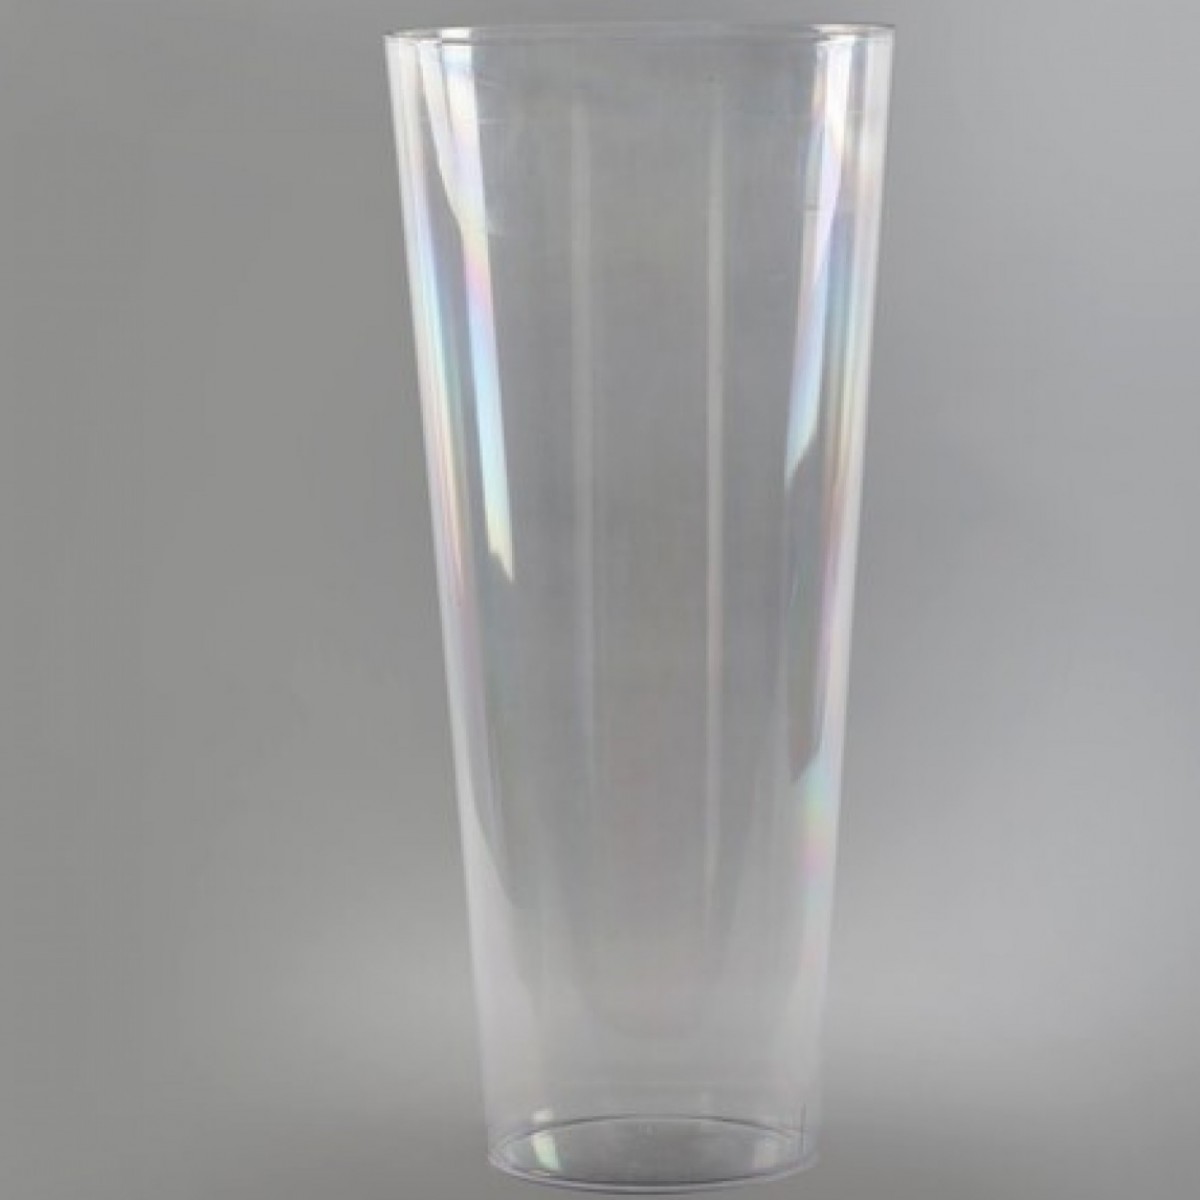 5128 Conical Clear 18x45cm Acrylic Vase - 1 No